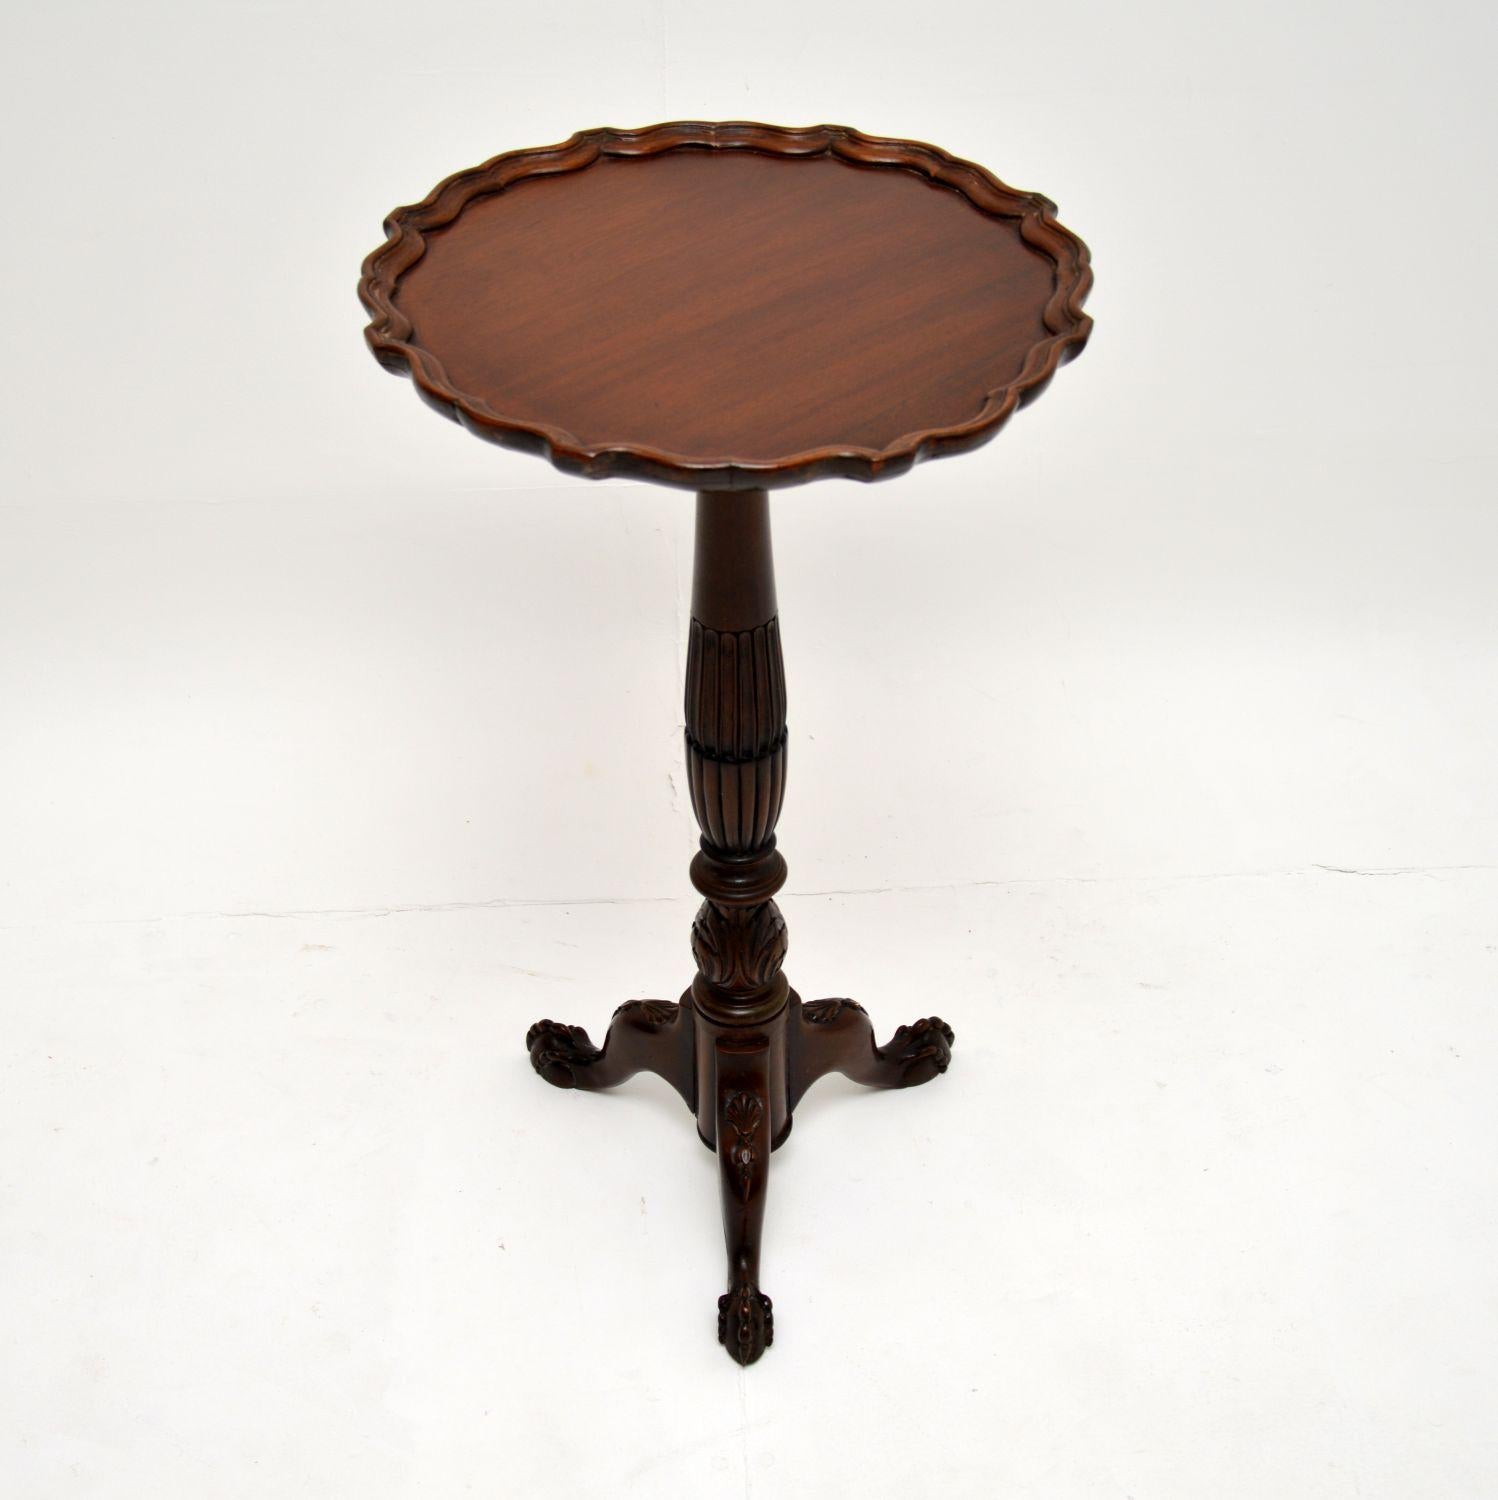 A beautiful original Victorian period occasional table, made in England & dating from around 1880-1890 period.
The quality is amazing, it has a finely turned & carved column which sits on a tripod base, with lovely, crisp carvings & well defined